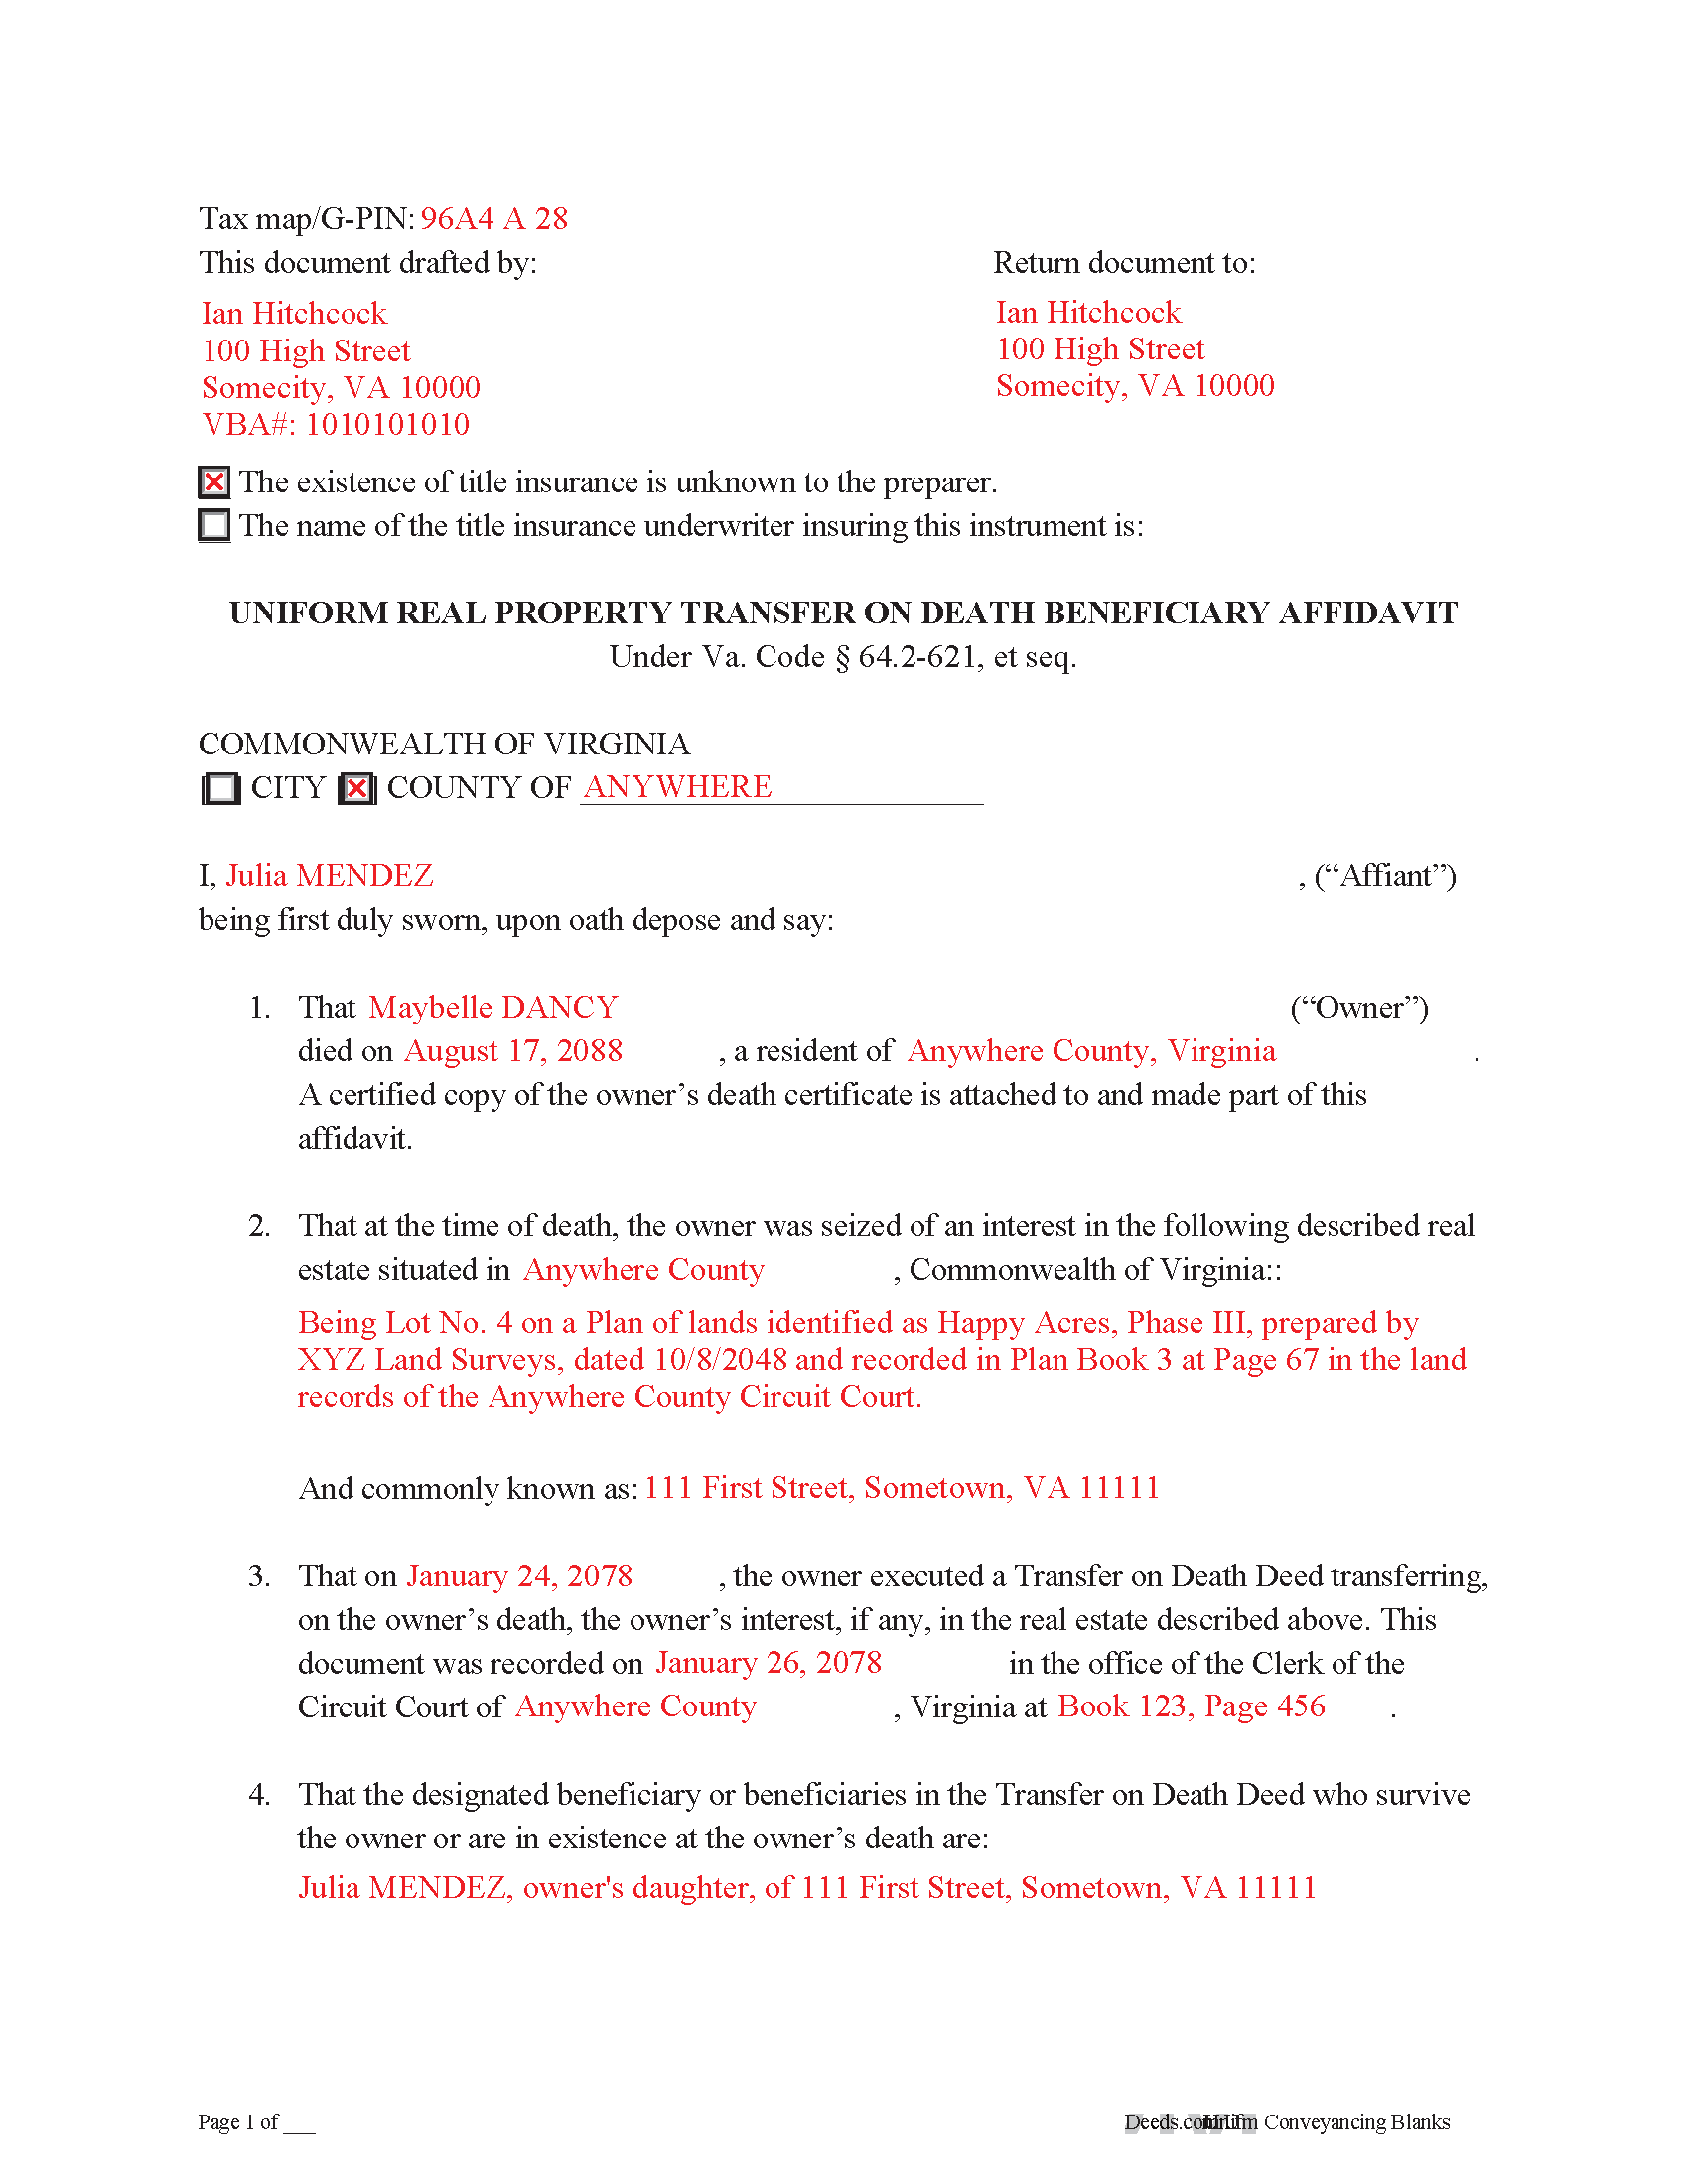 Completed Example of the Transfer on Death Deed Beneficary Affidavit Document